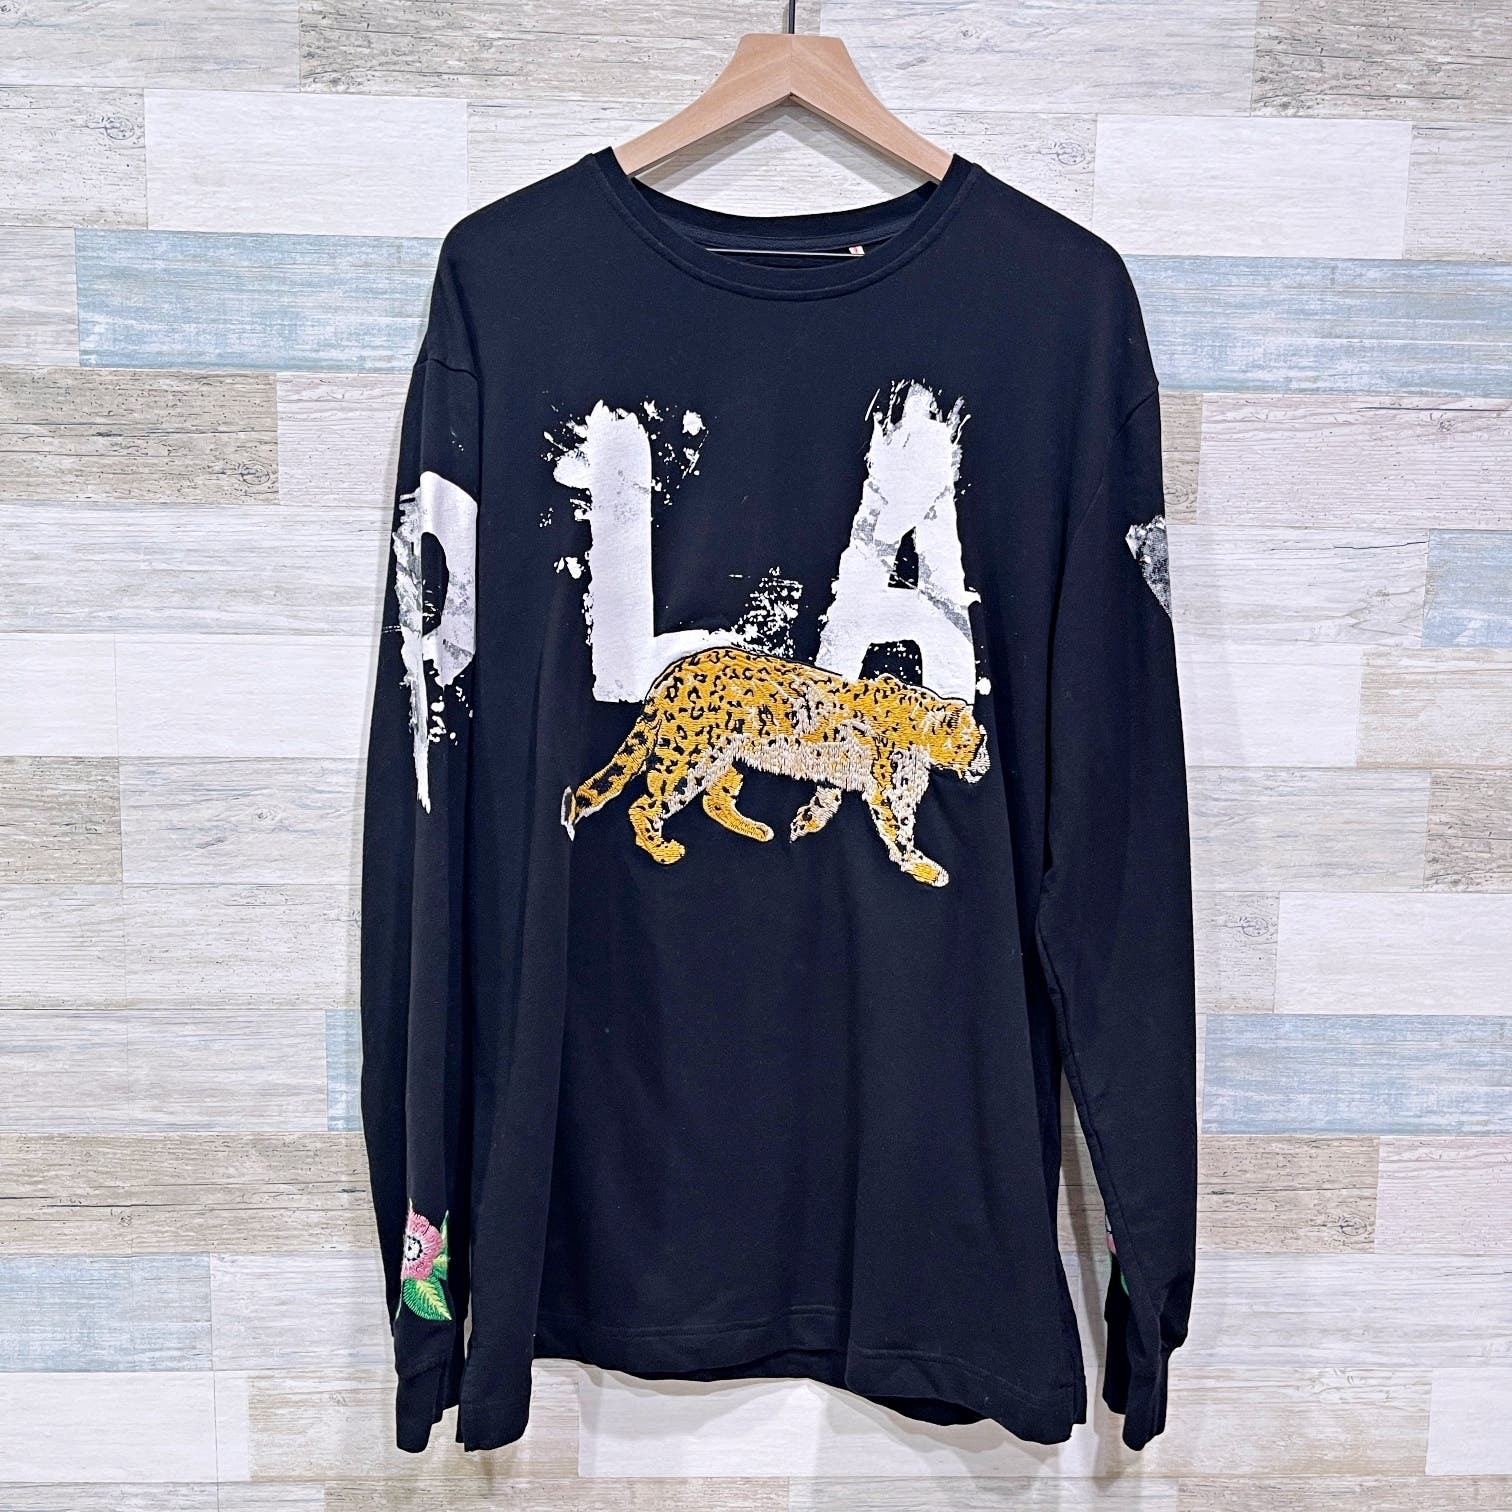 Primary image for Play Cloths Graffiti Logo Leopard Long Sleeve Tee Black Cotton Blend Mens XL